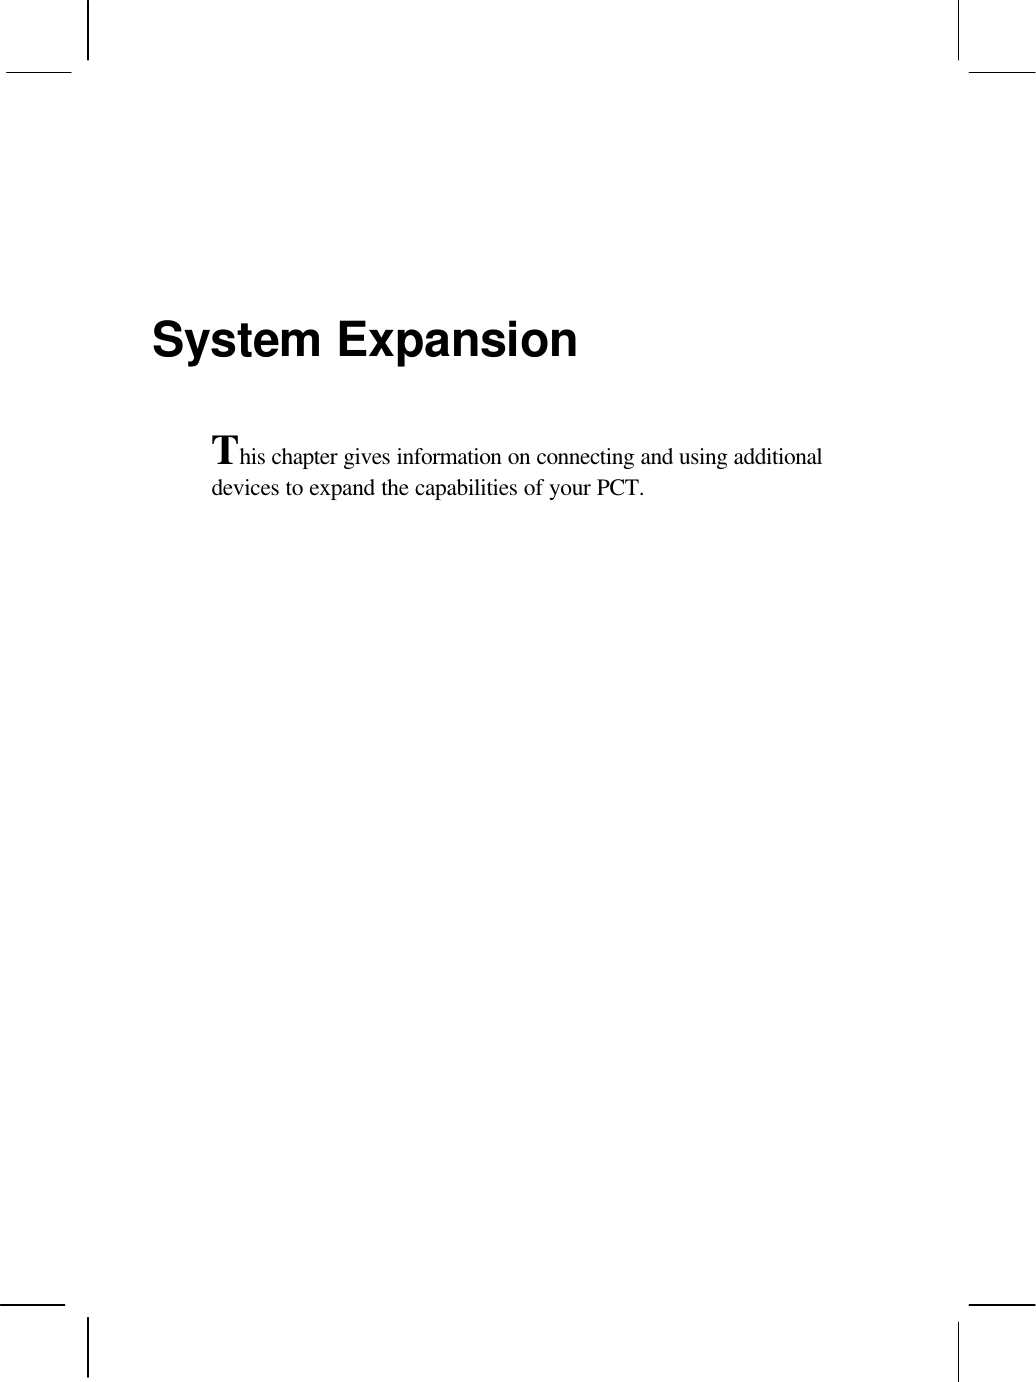 System ExpansionThis chapter gives information on connecting and using additionaldevices to expand the capabilities of your PCT.